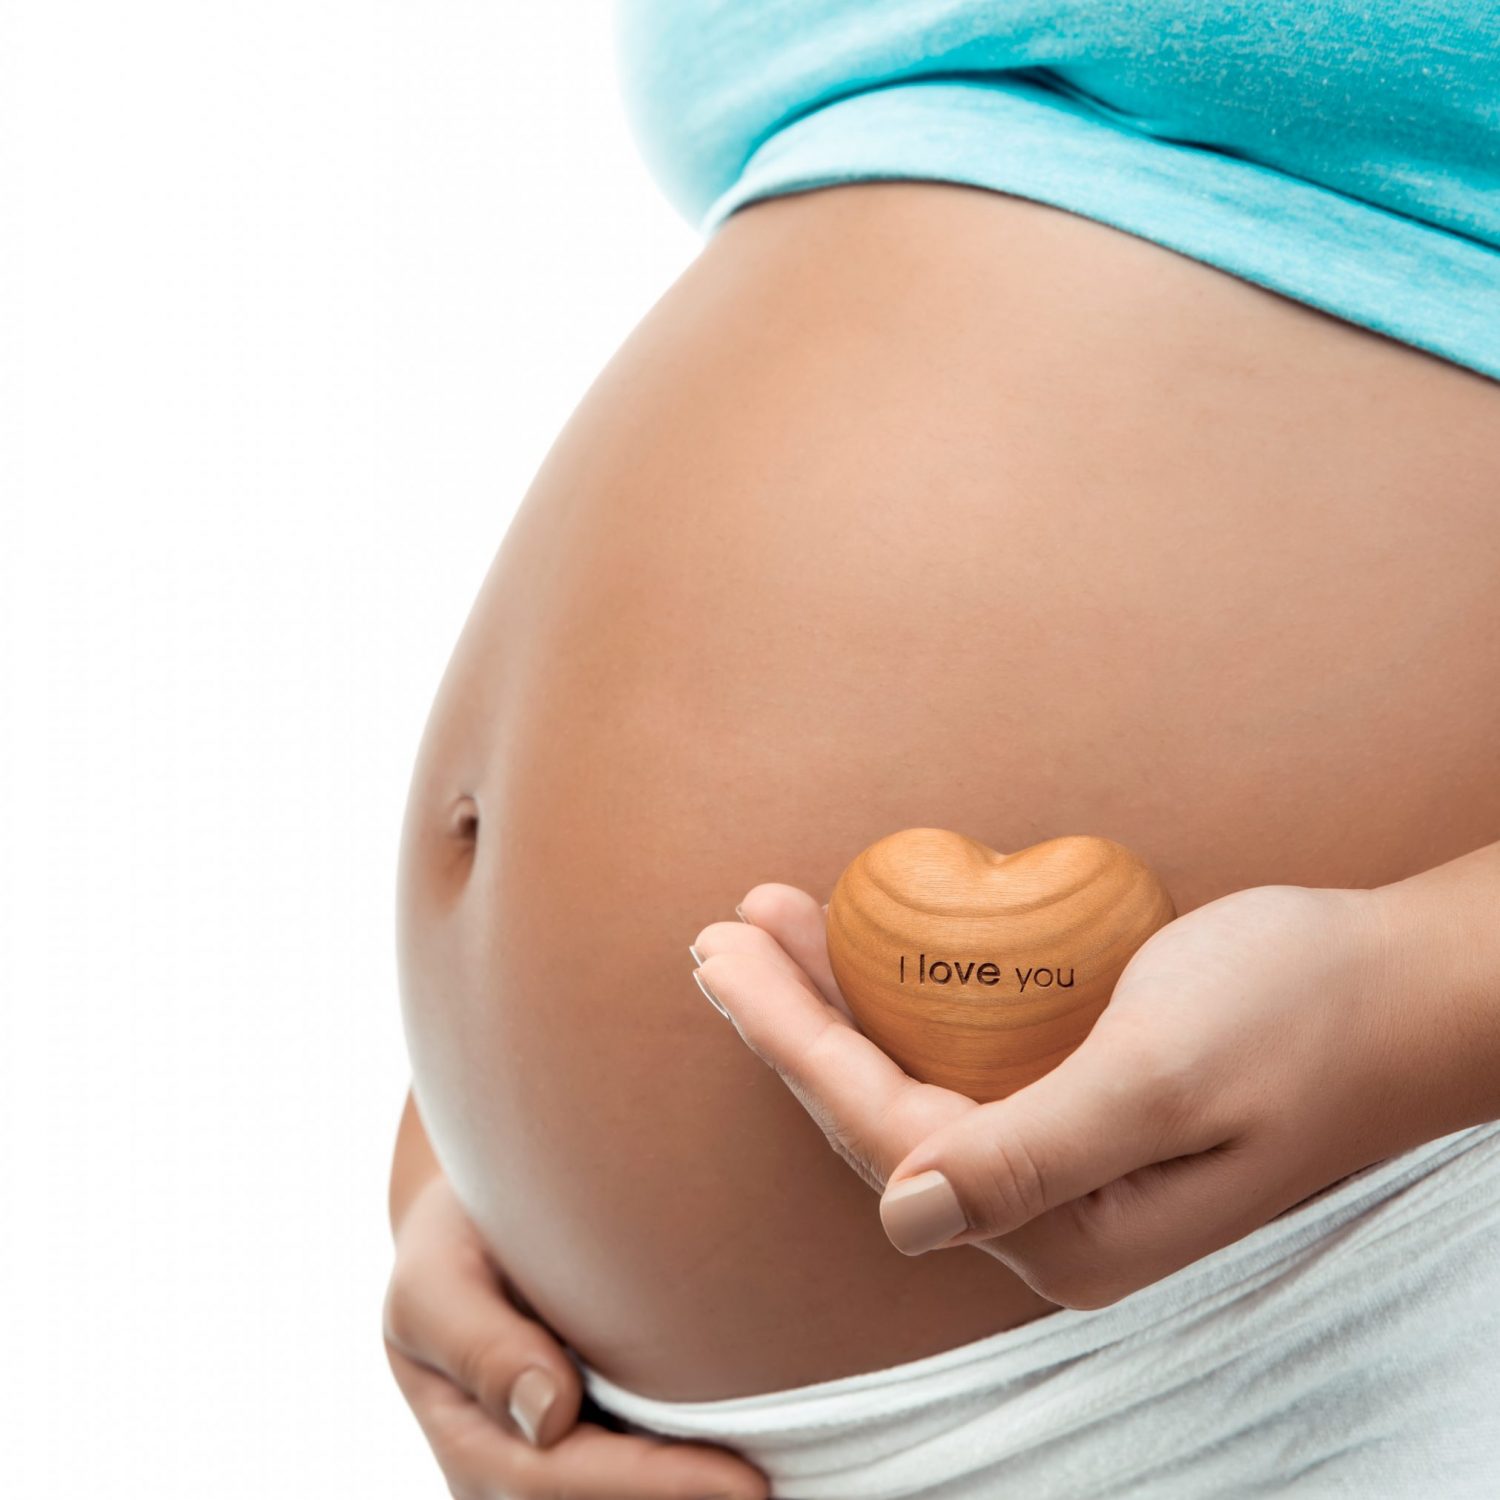 Closeup Photo of a Tummy of Pregnant Woman and Little Decorative Wooden Heart. I Love You. Body Part. New Life Concept.